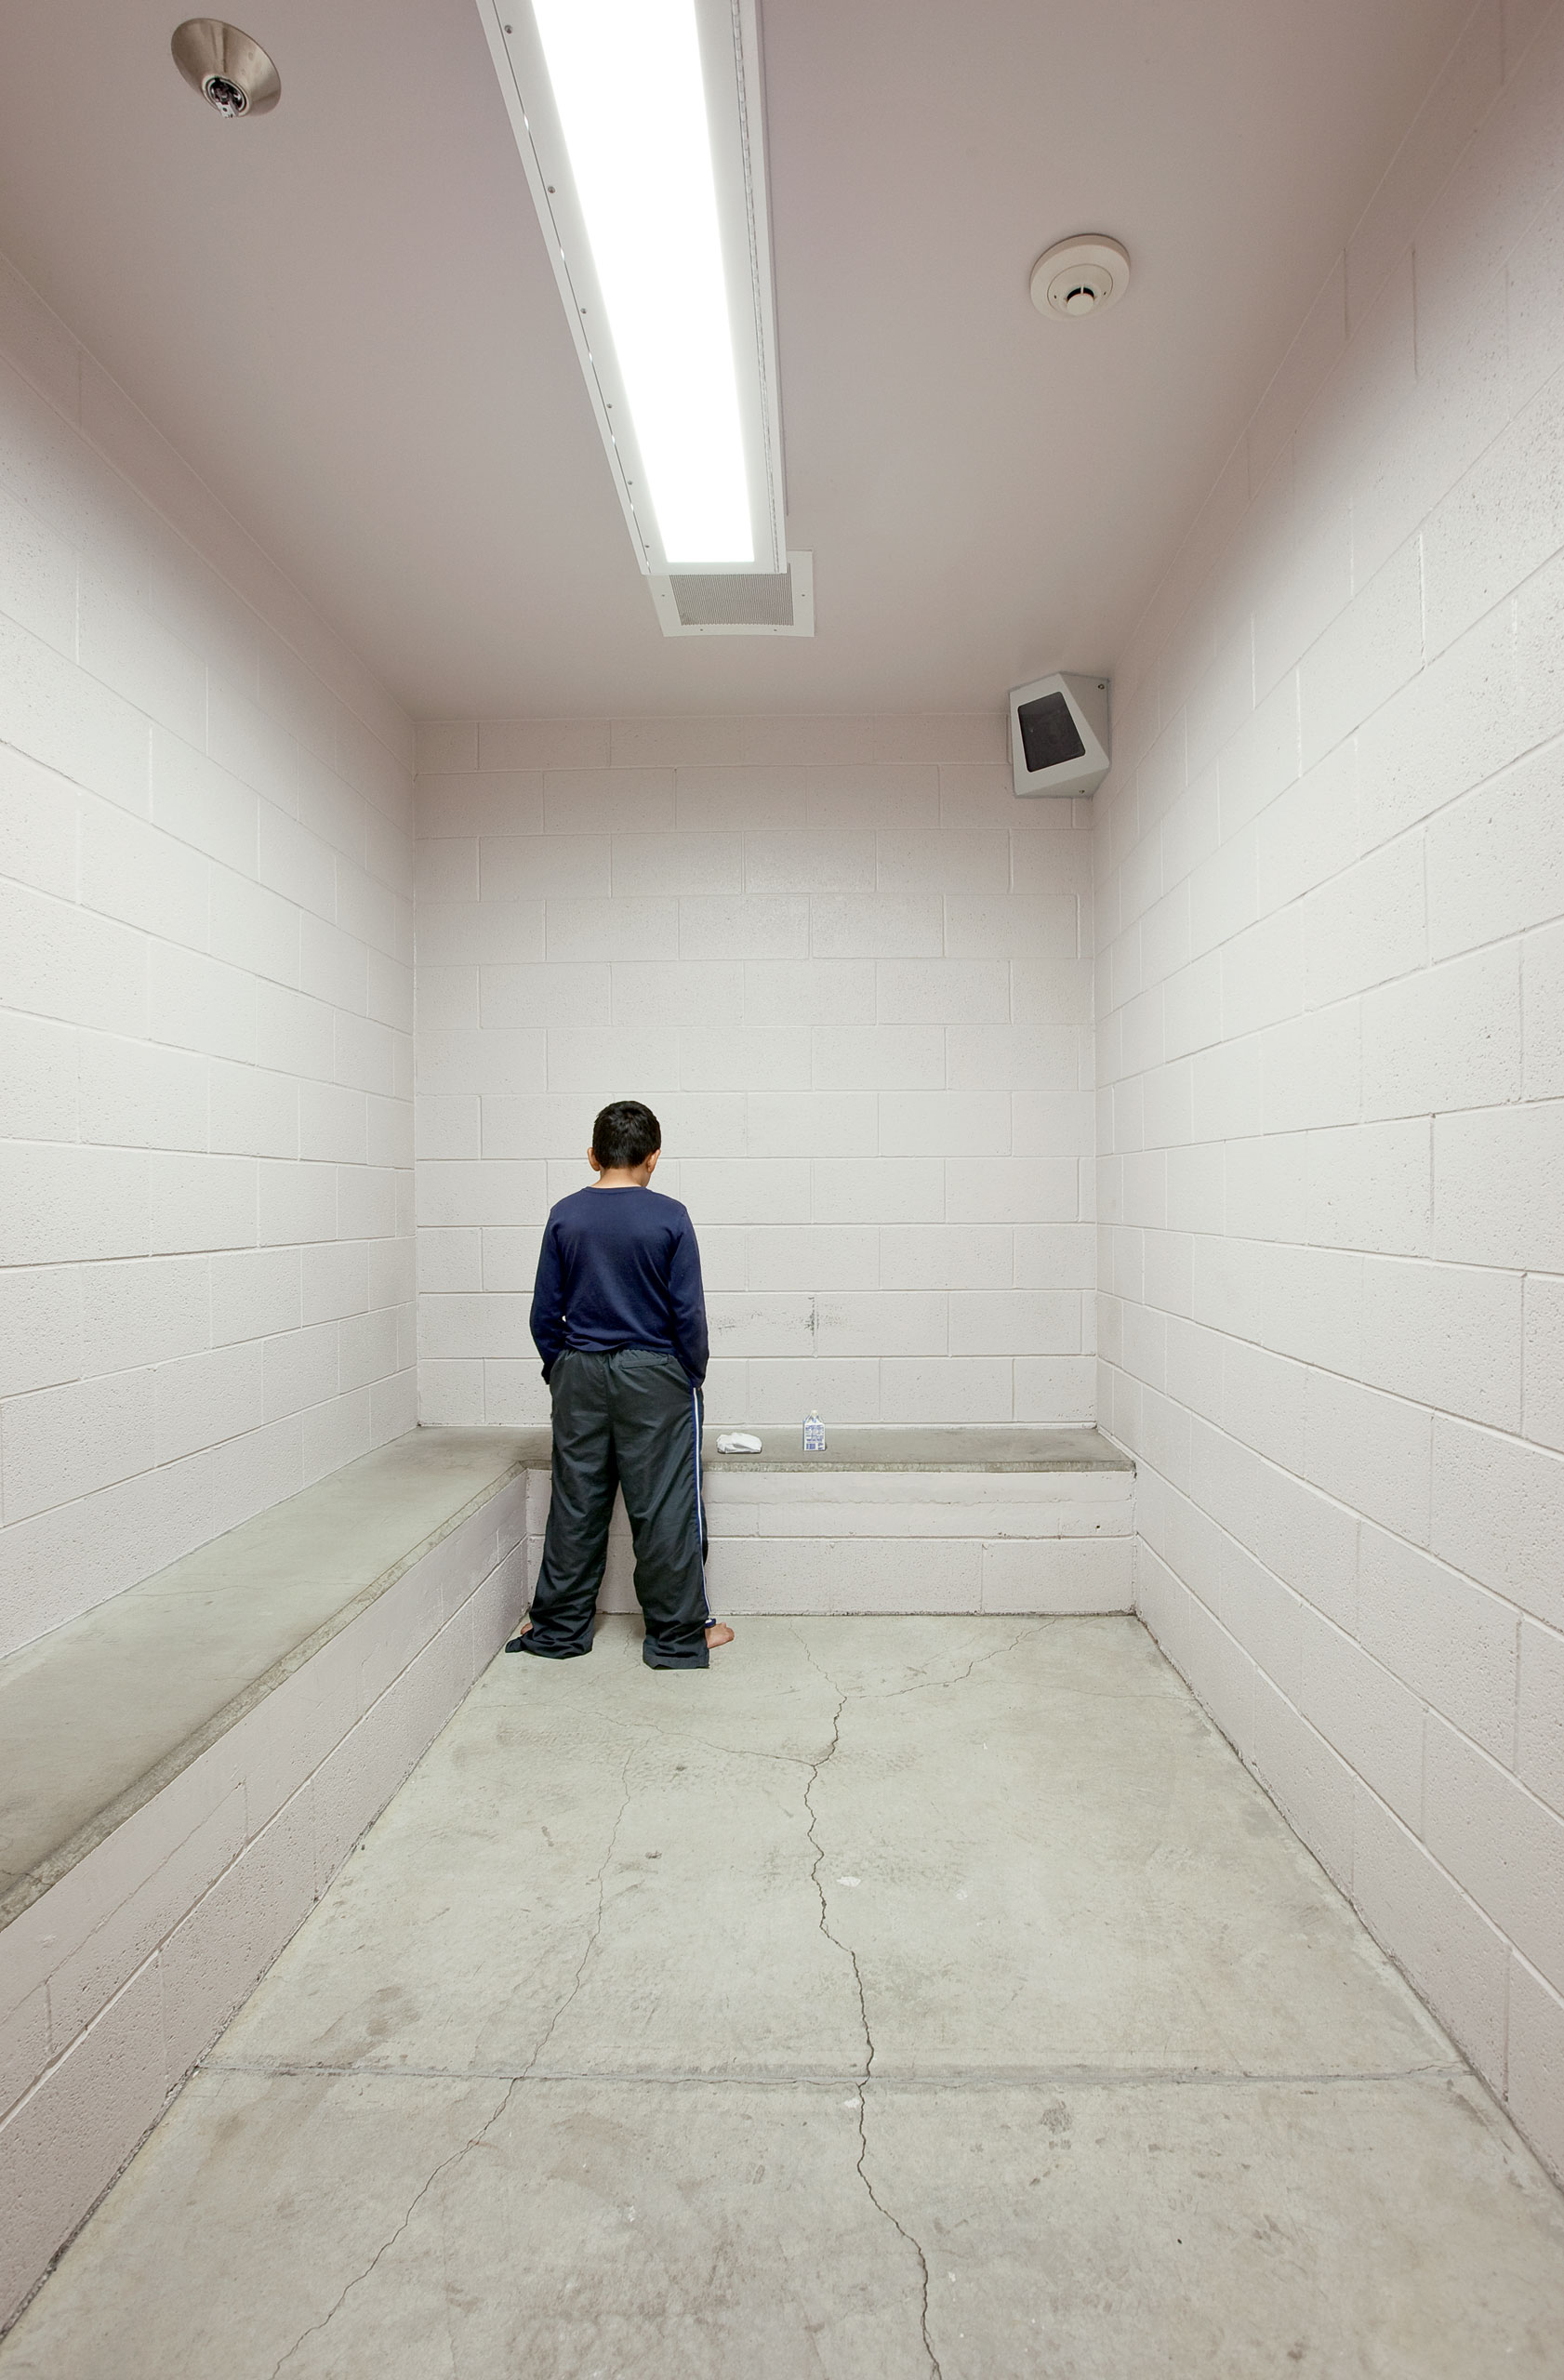 Washoe County Detention Facility, Reno, Nevada.BASICS: Built in 2004 for a capacity of 108, all are pre-adjudicated. The facility holds youth for up to 30 days before transferring them to commitment. PICTURED: R, age 10, a 5th grader, brought in from school by a policeman. He seemed tiny and timid, standing barefoot in oversized warm-up pants and a sweatshirt. He was waiting to be picked up by his mom, who couldn't come get him until she got off work, for fear of losing her job. He is checked on every five minutes. He stabbed a schoolmate- but it is unclear what the tool was, pencil, knife, fork... The Director of the facility tells me that one principal had an 8-year-old brought in for swiping a bagel off his desk. The director says, this is not the place for these offenses.